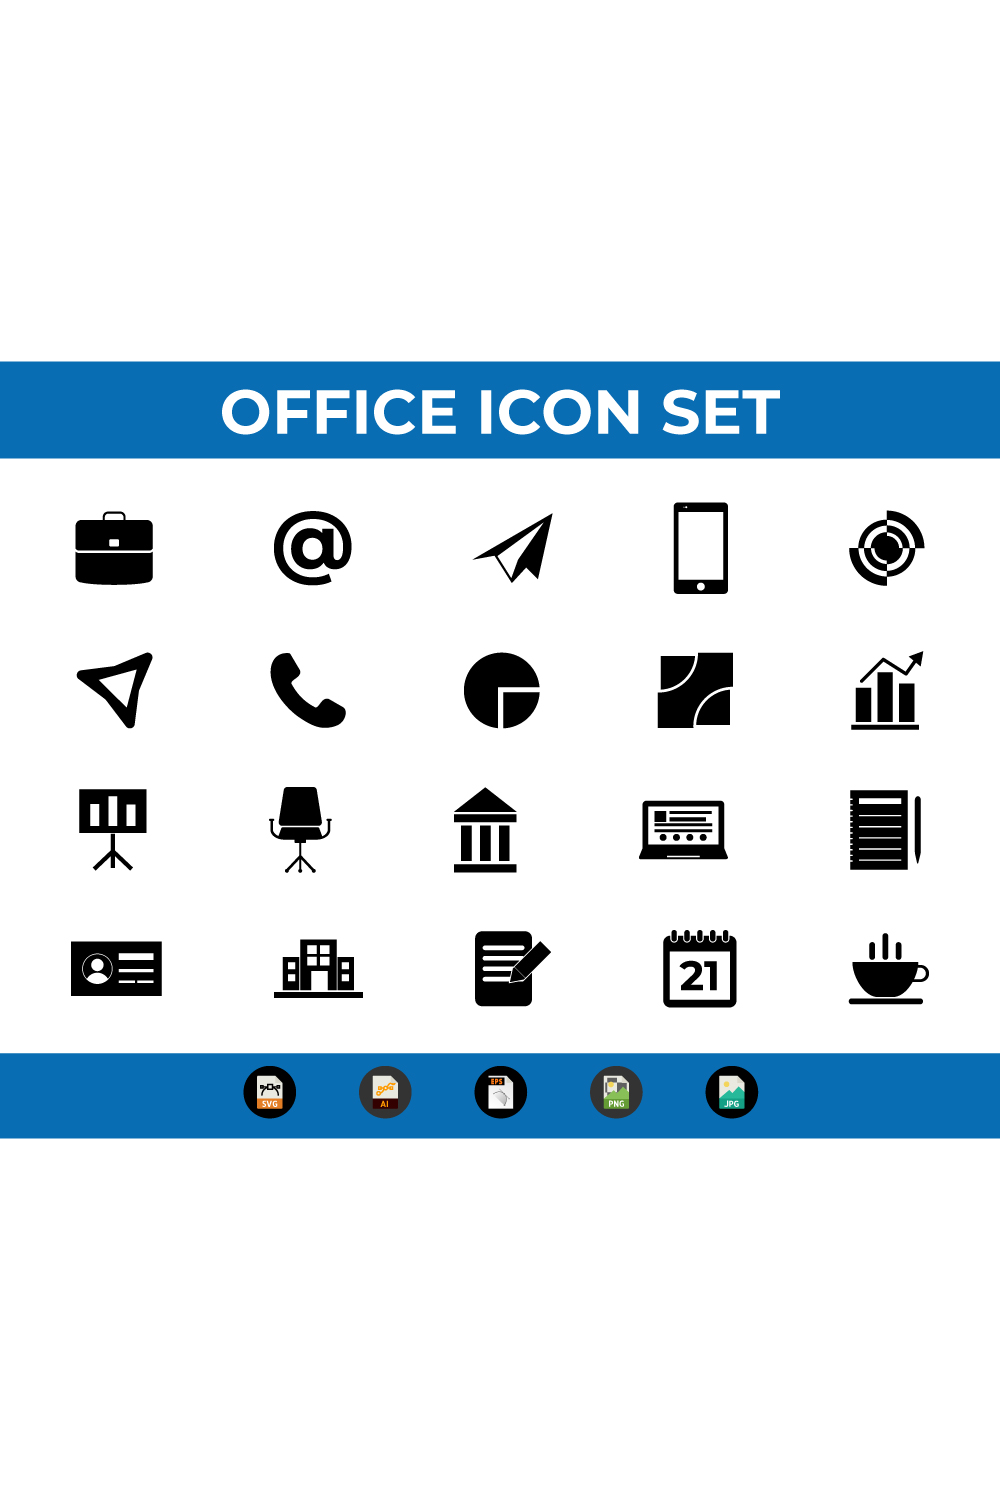 Pinterest images of icons set.